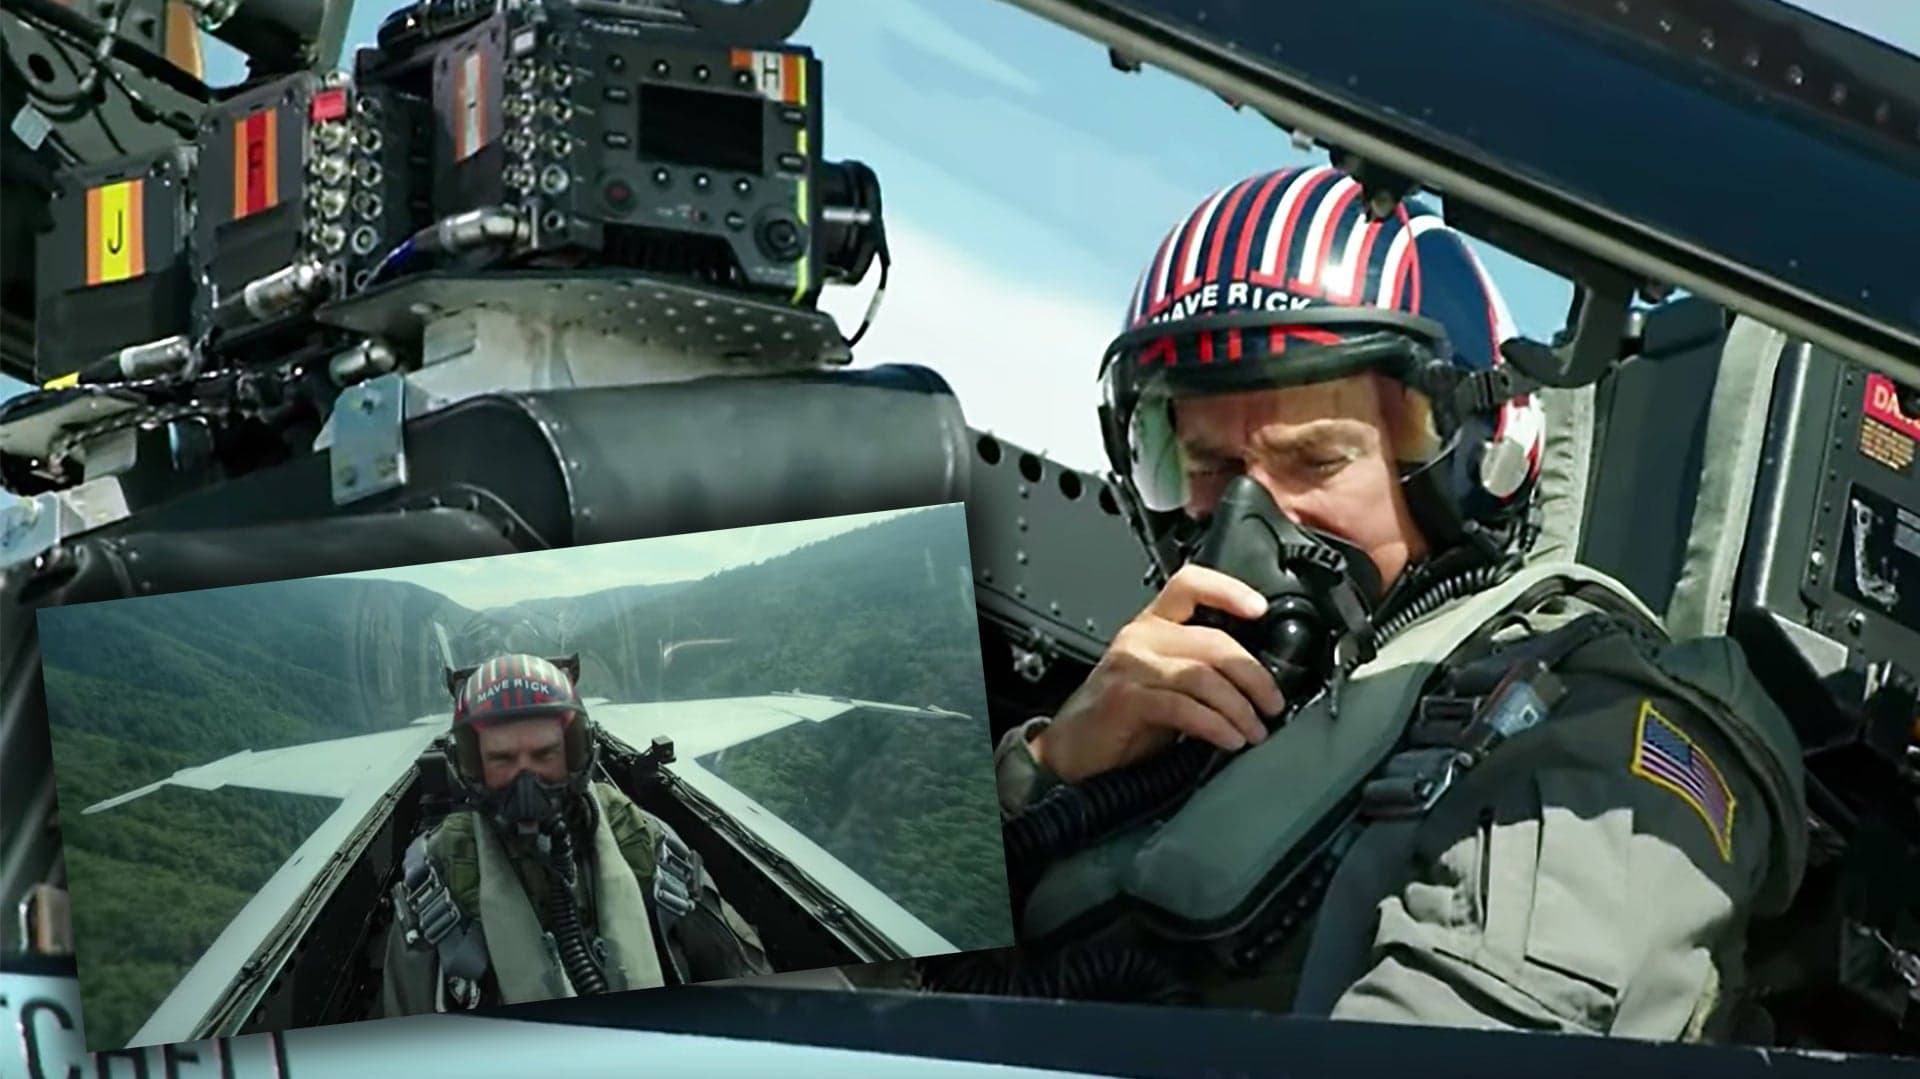 A Must Watch Behind The Scenes Look At How Top Gun 2’s Flying Sequences Were Shot